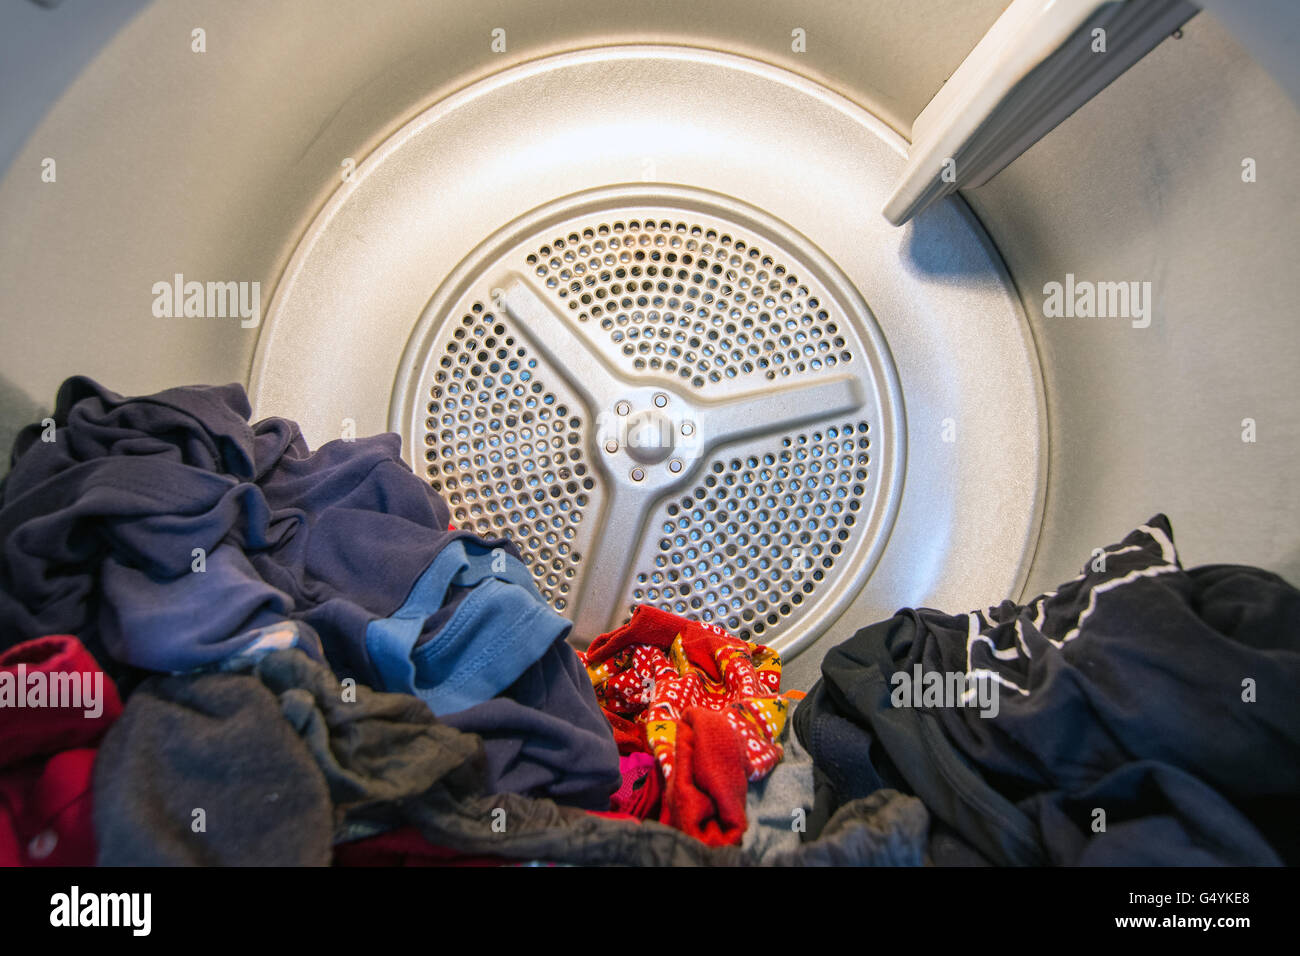 Inside view of a domestic tumble drier (clothes drier) with clothing in it Stock Photo